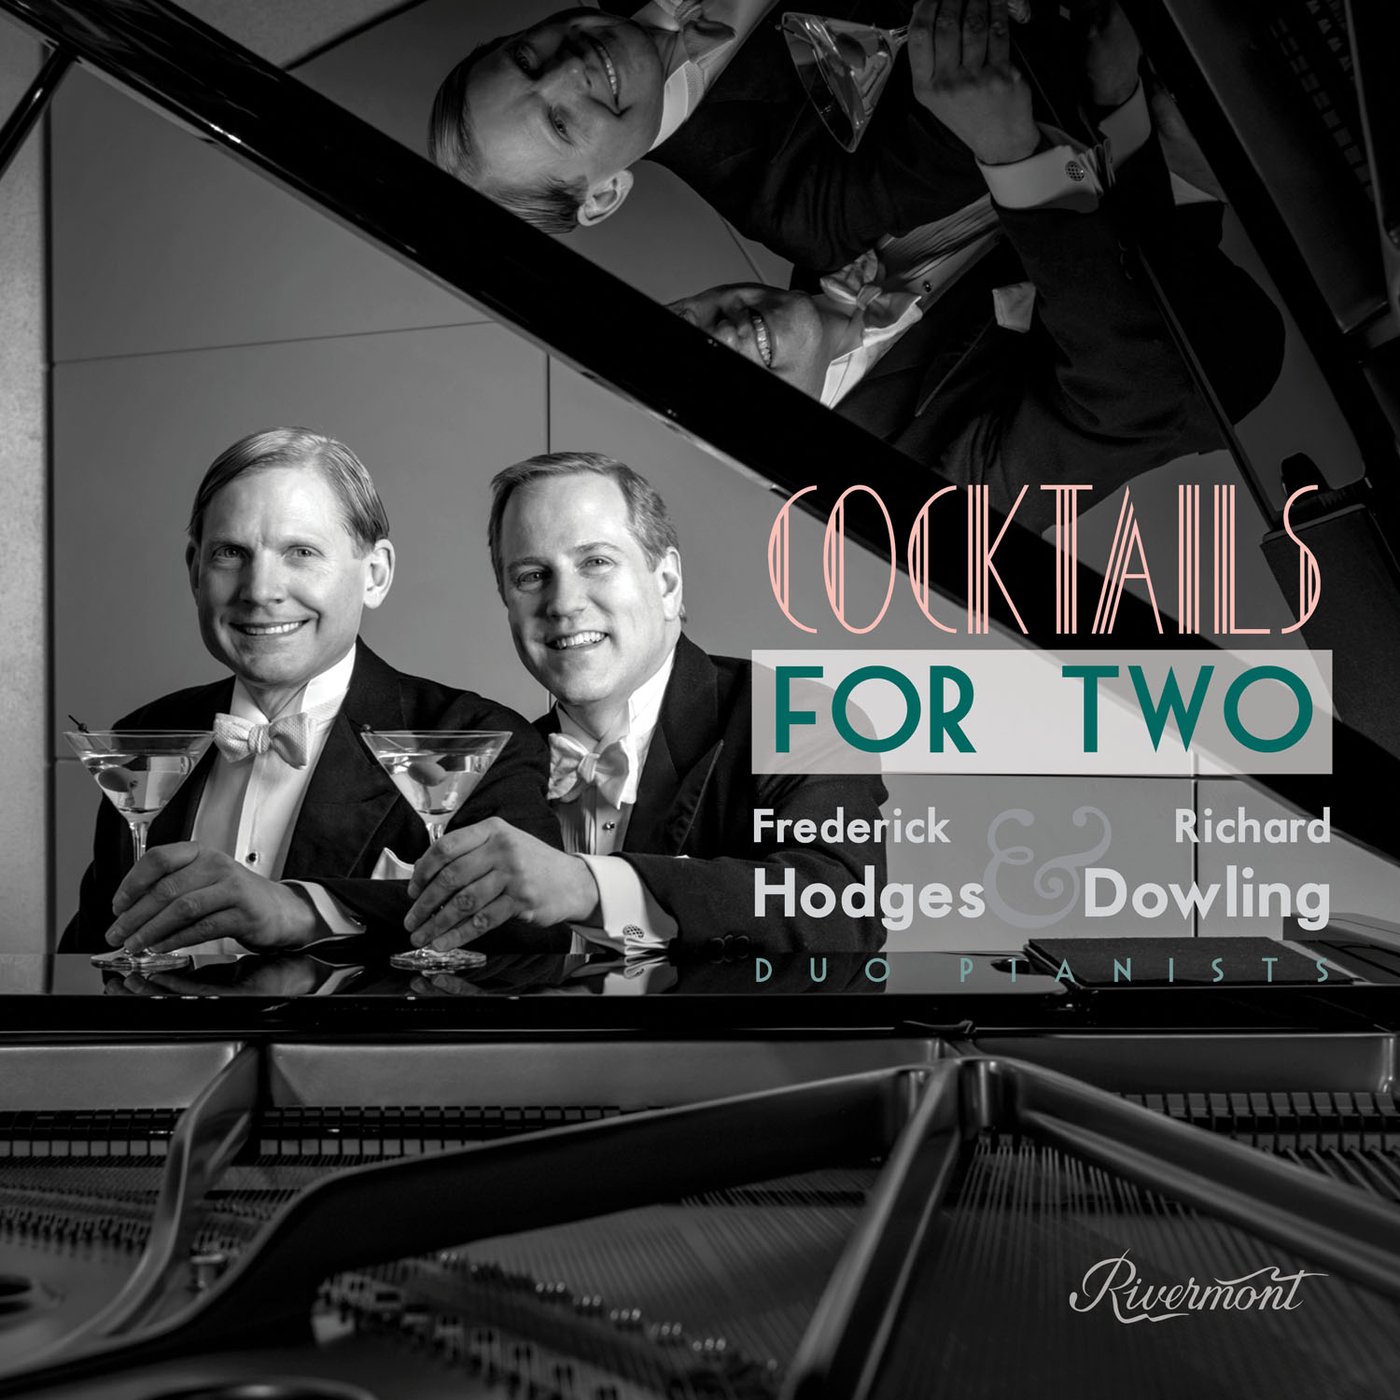 FREDERICK HODGES - Frederick Hodges and Richard Dowling : Cocktails For Two cover 